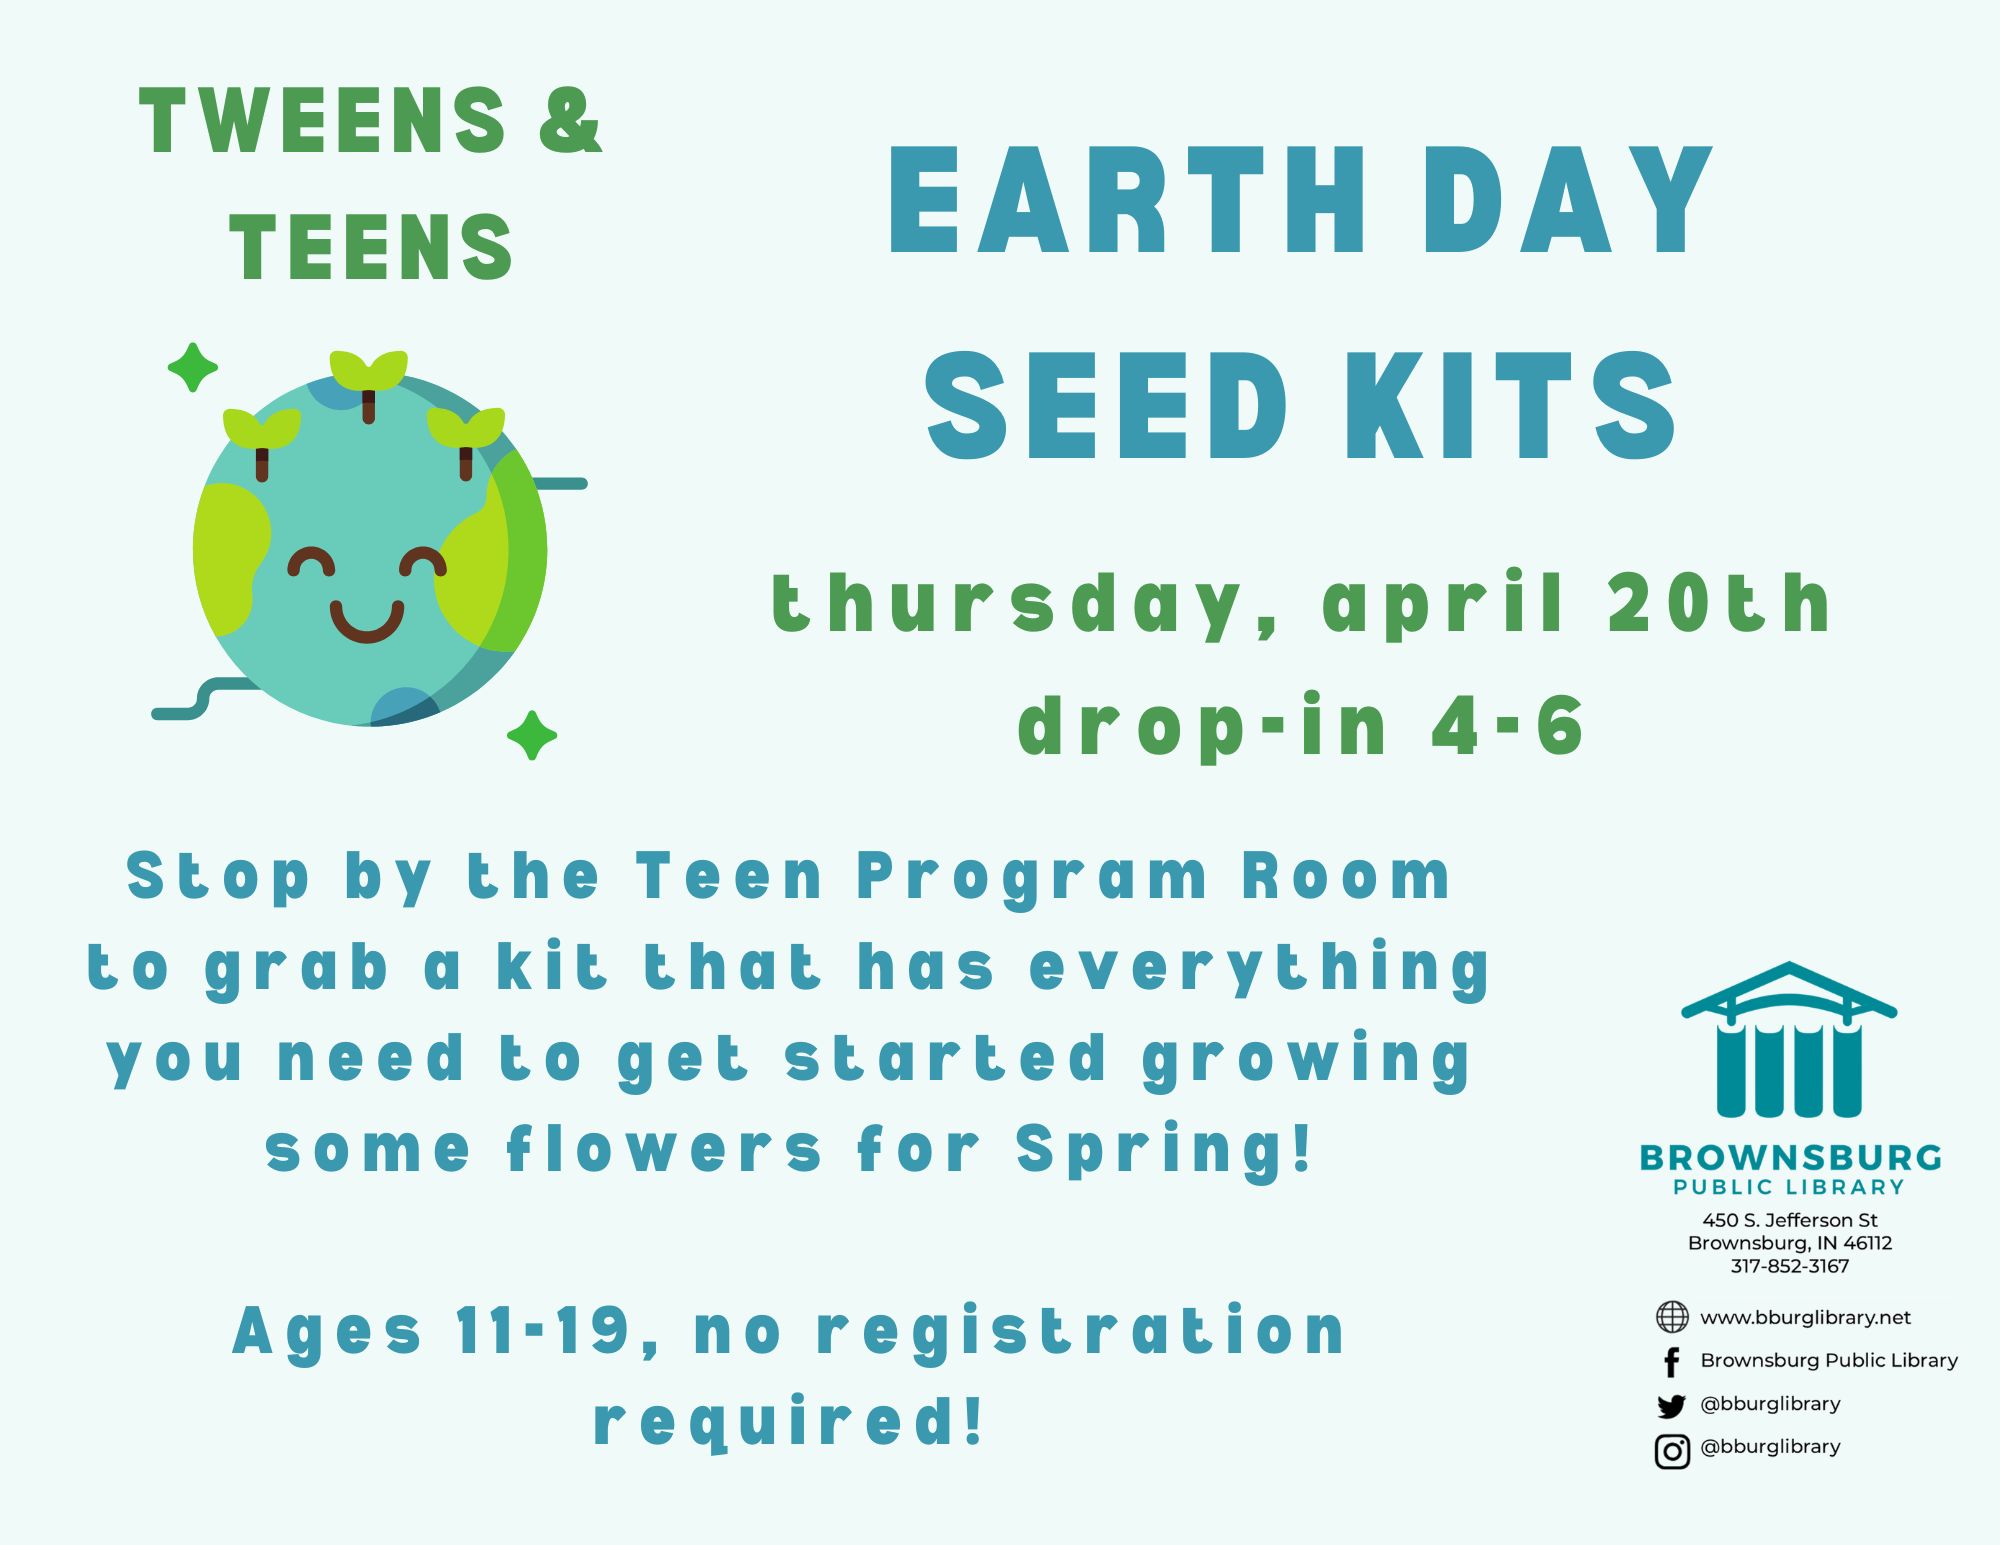 Image promoting the seed kits with library info at the bottom.